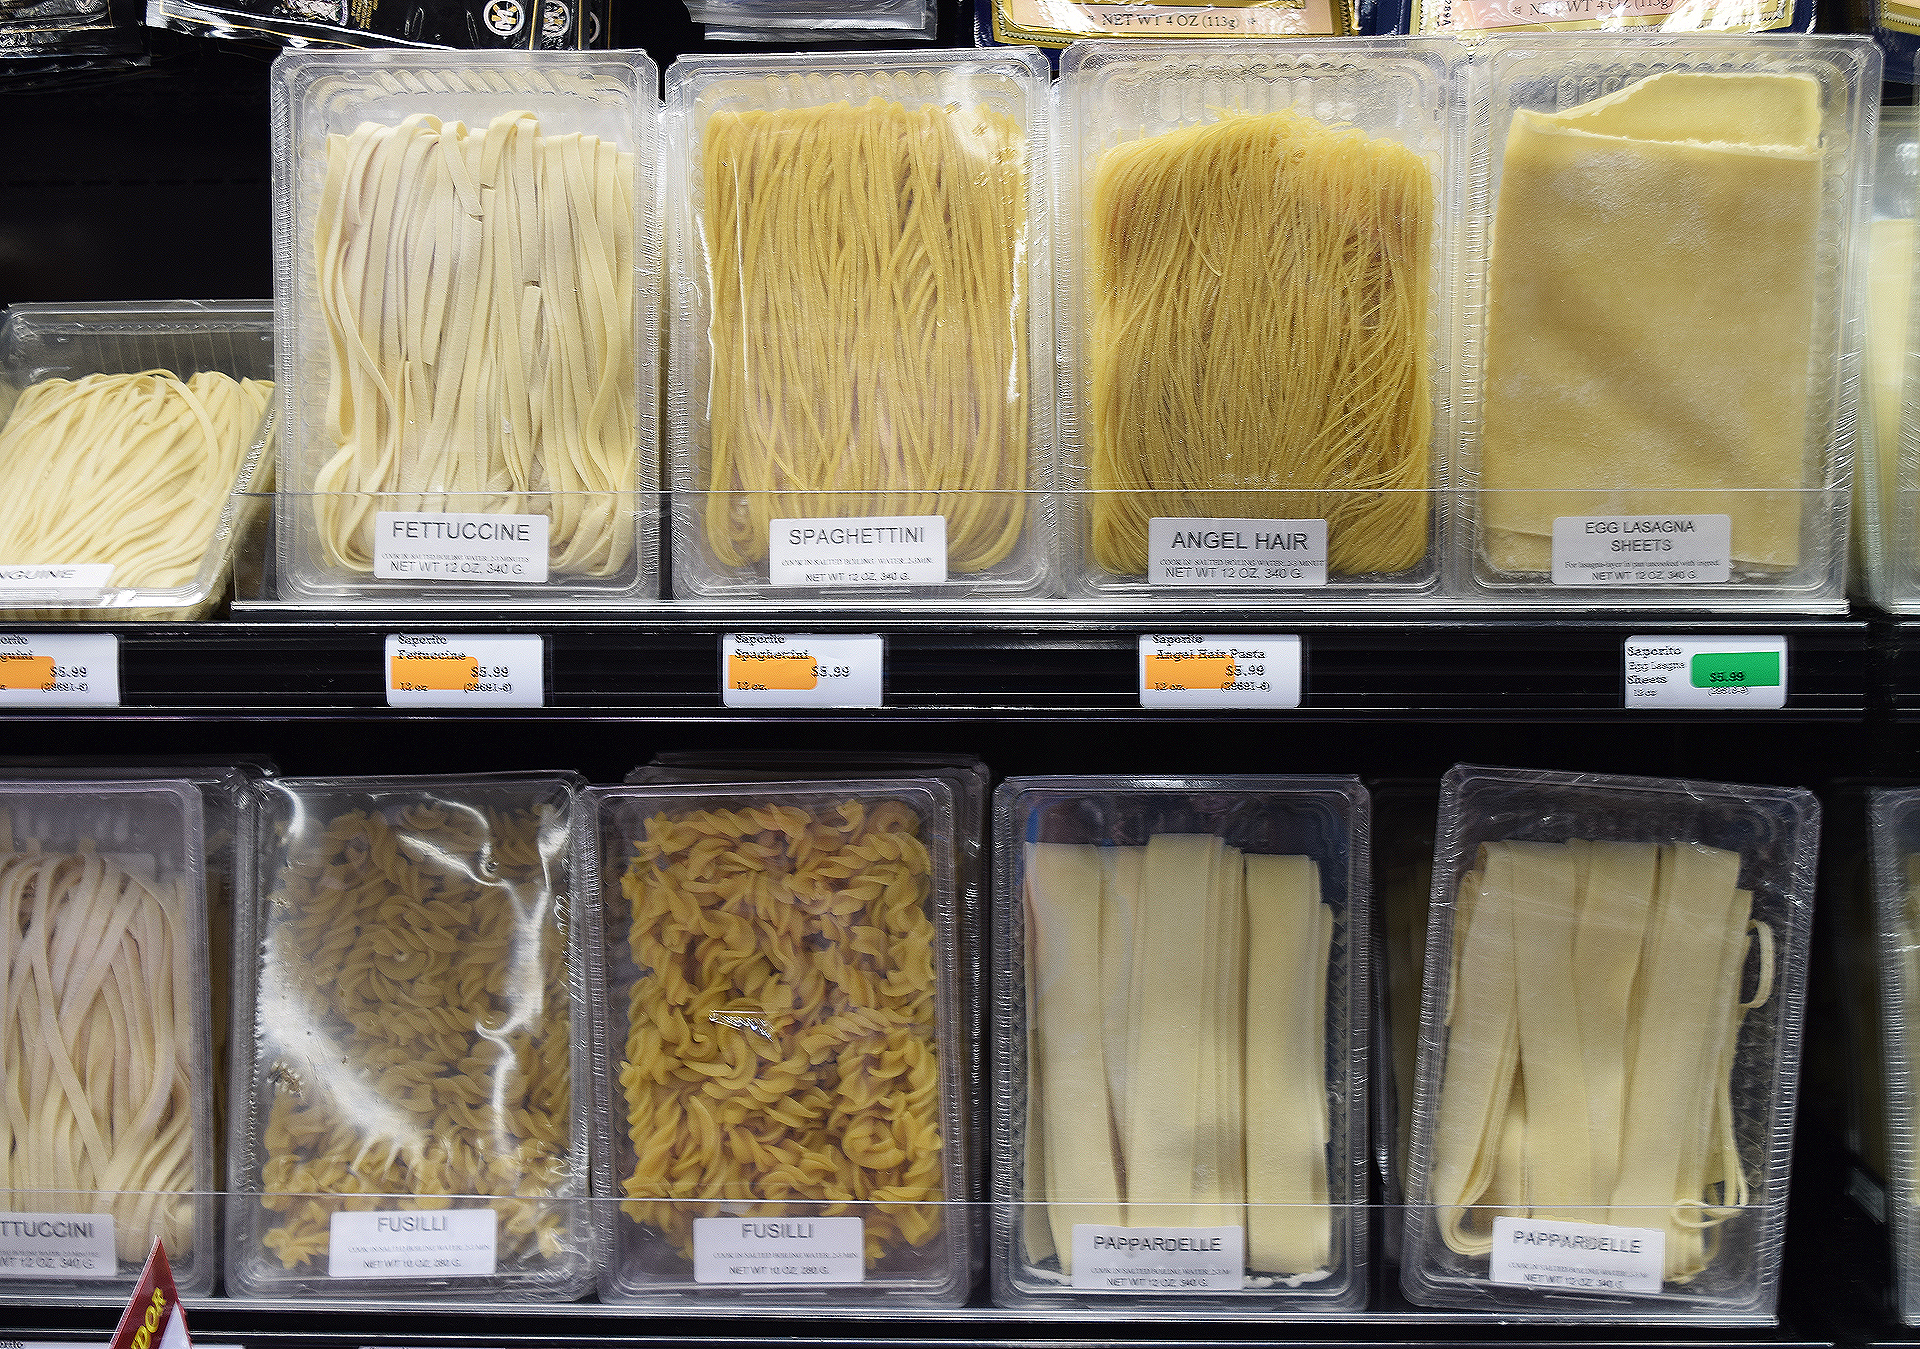 Sigona's carries a broad selection of the reasonably priced fresh pasta noodles from Saporito, whose plant is in Redwood City. The noodles are a tad thinner than those from other producers and when cooked have a pleasing flavor with still-toothy texture.